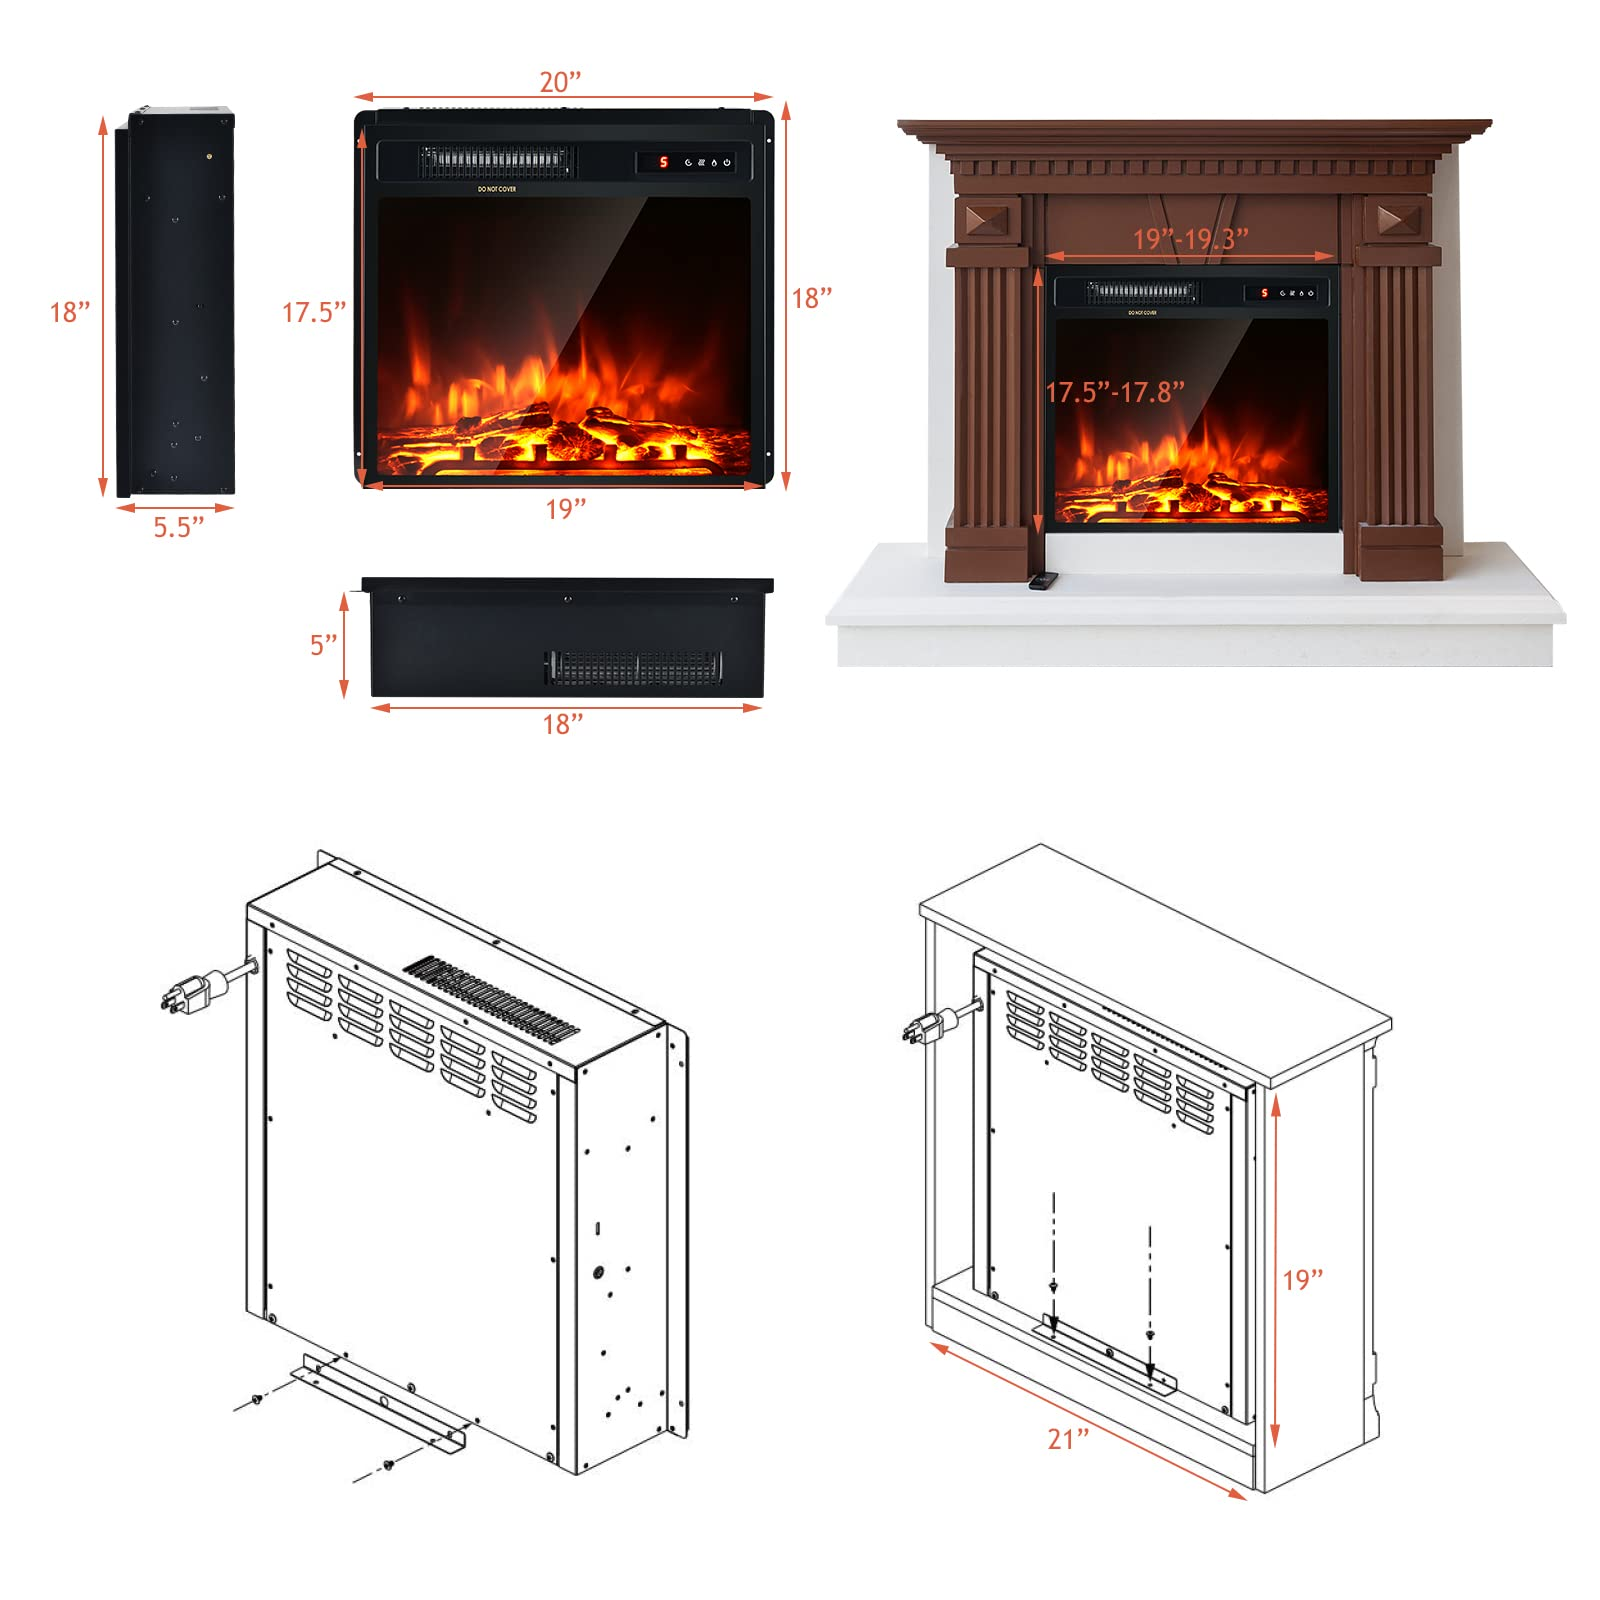 Giantex 18'' Electric Fireplace, Fireplace Inserts Electric Heater